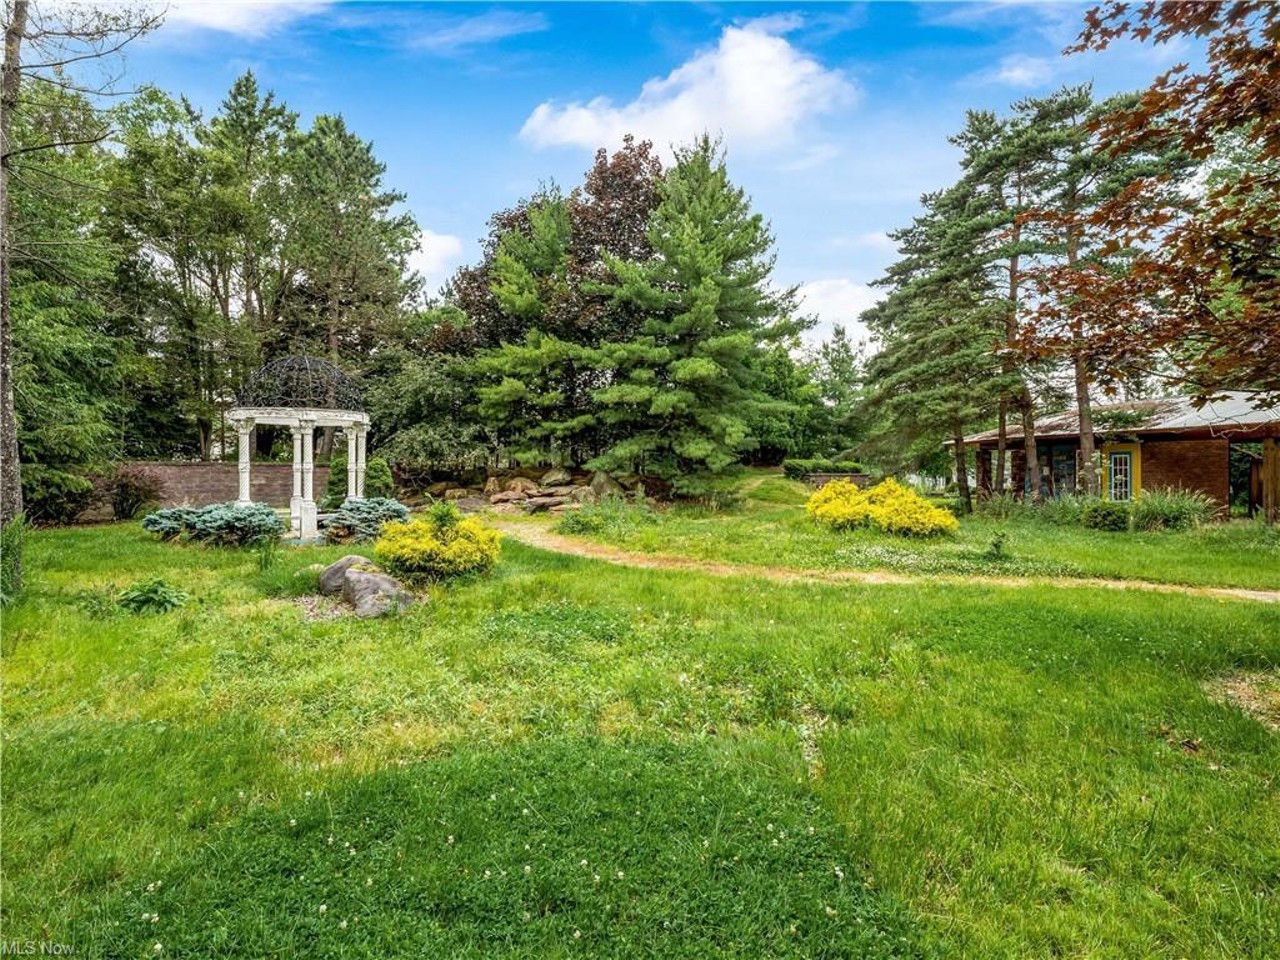 This $400,000 North Royalton Fixer-Upper Basically Has A Park For Its Backyard